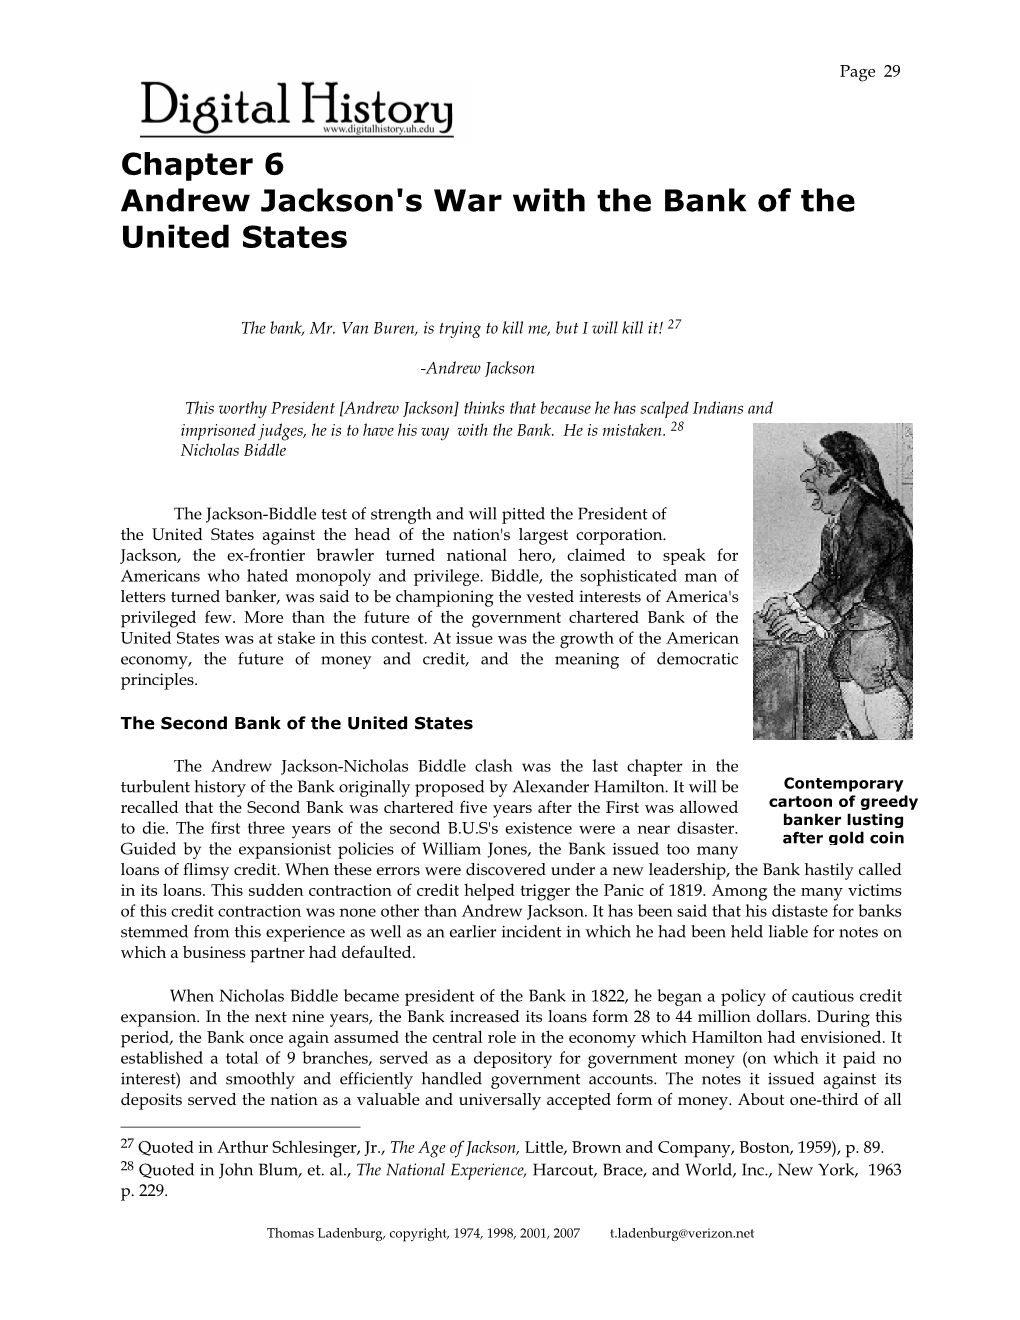 Chapter 6 Andrew Jackson's War with the Bank of the United States